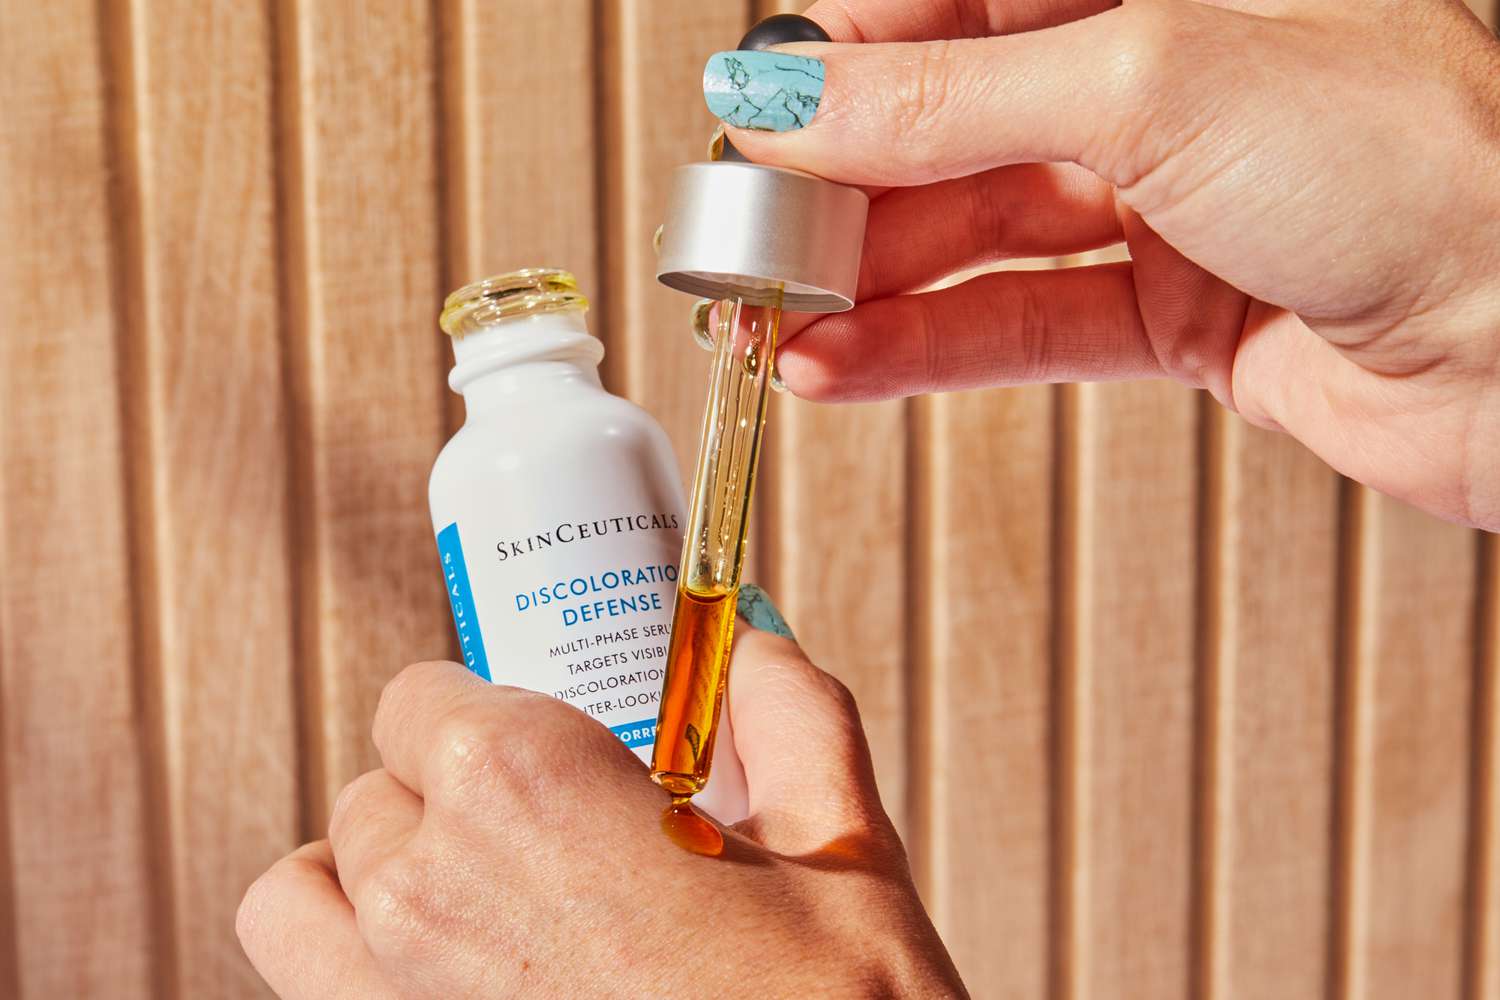 hand dispensing Skinceuticals Discoloration Defense from dropper onto back of other hand